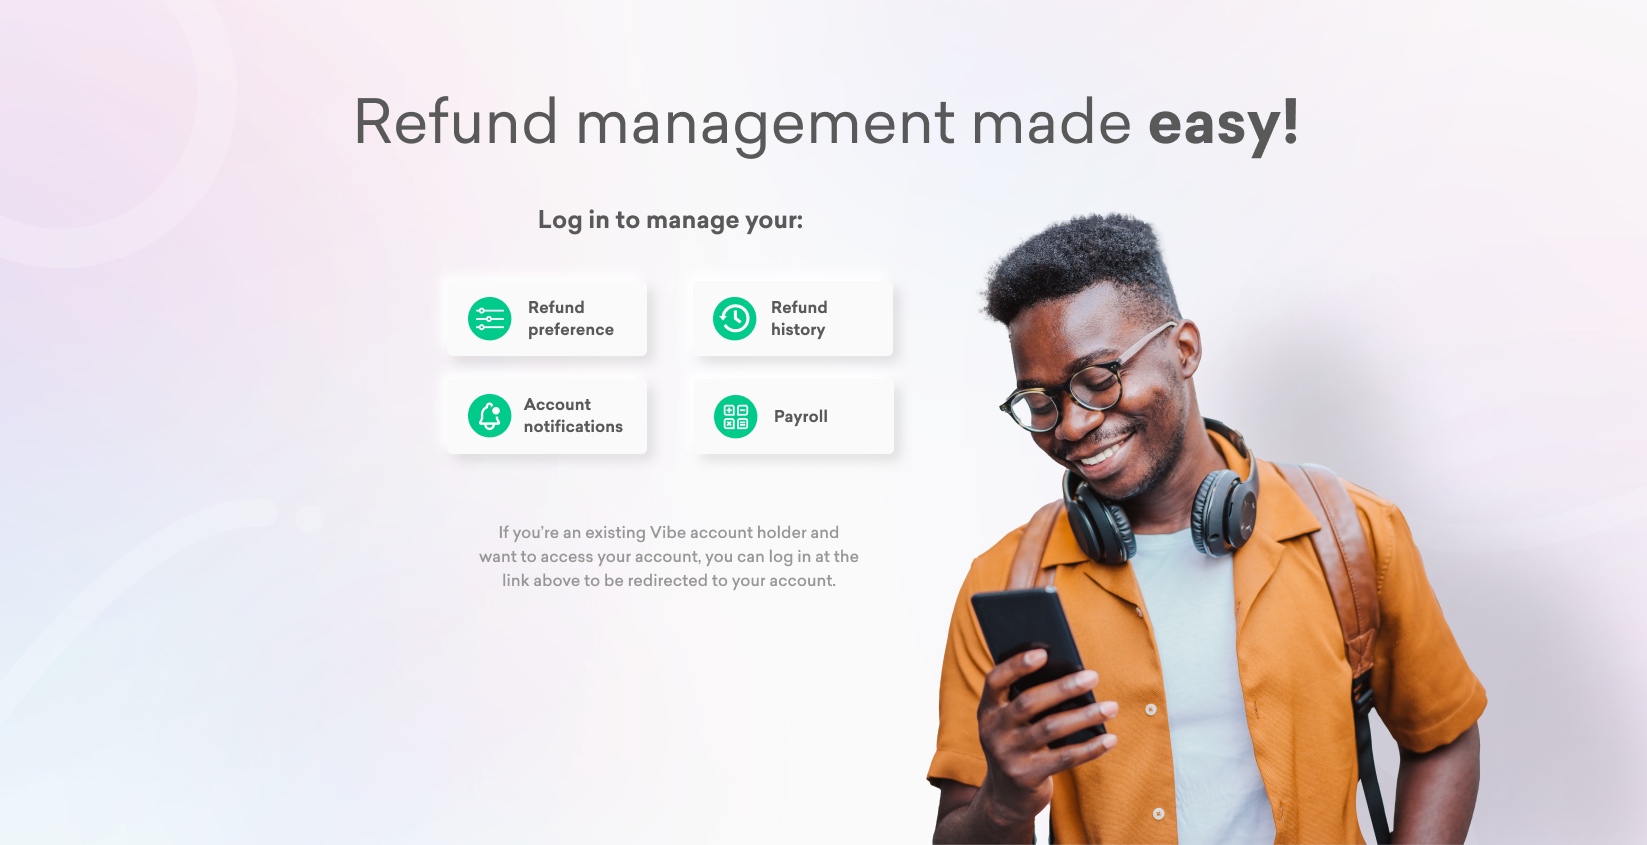 Log in again to manage your refund preference, refund history, account notifications, and payroll.